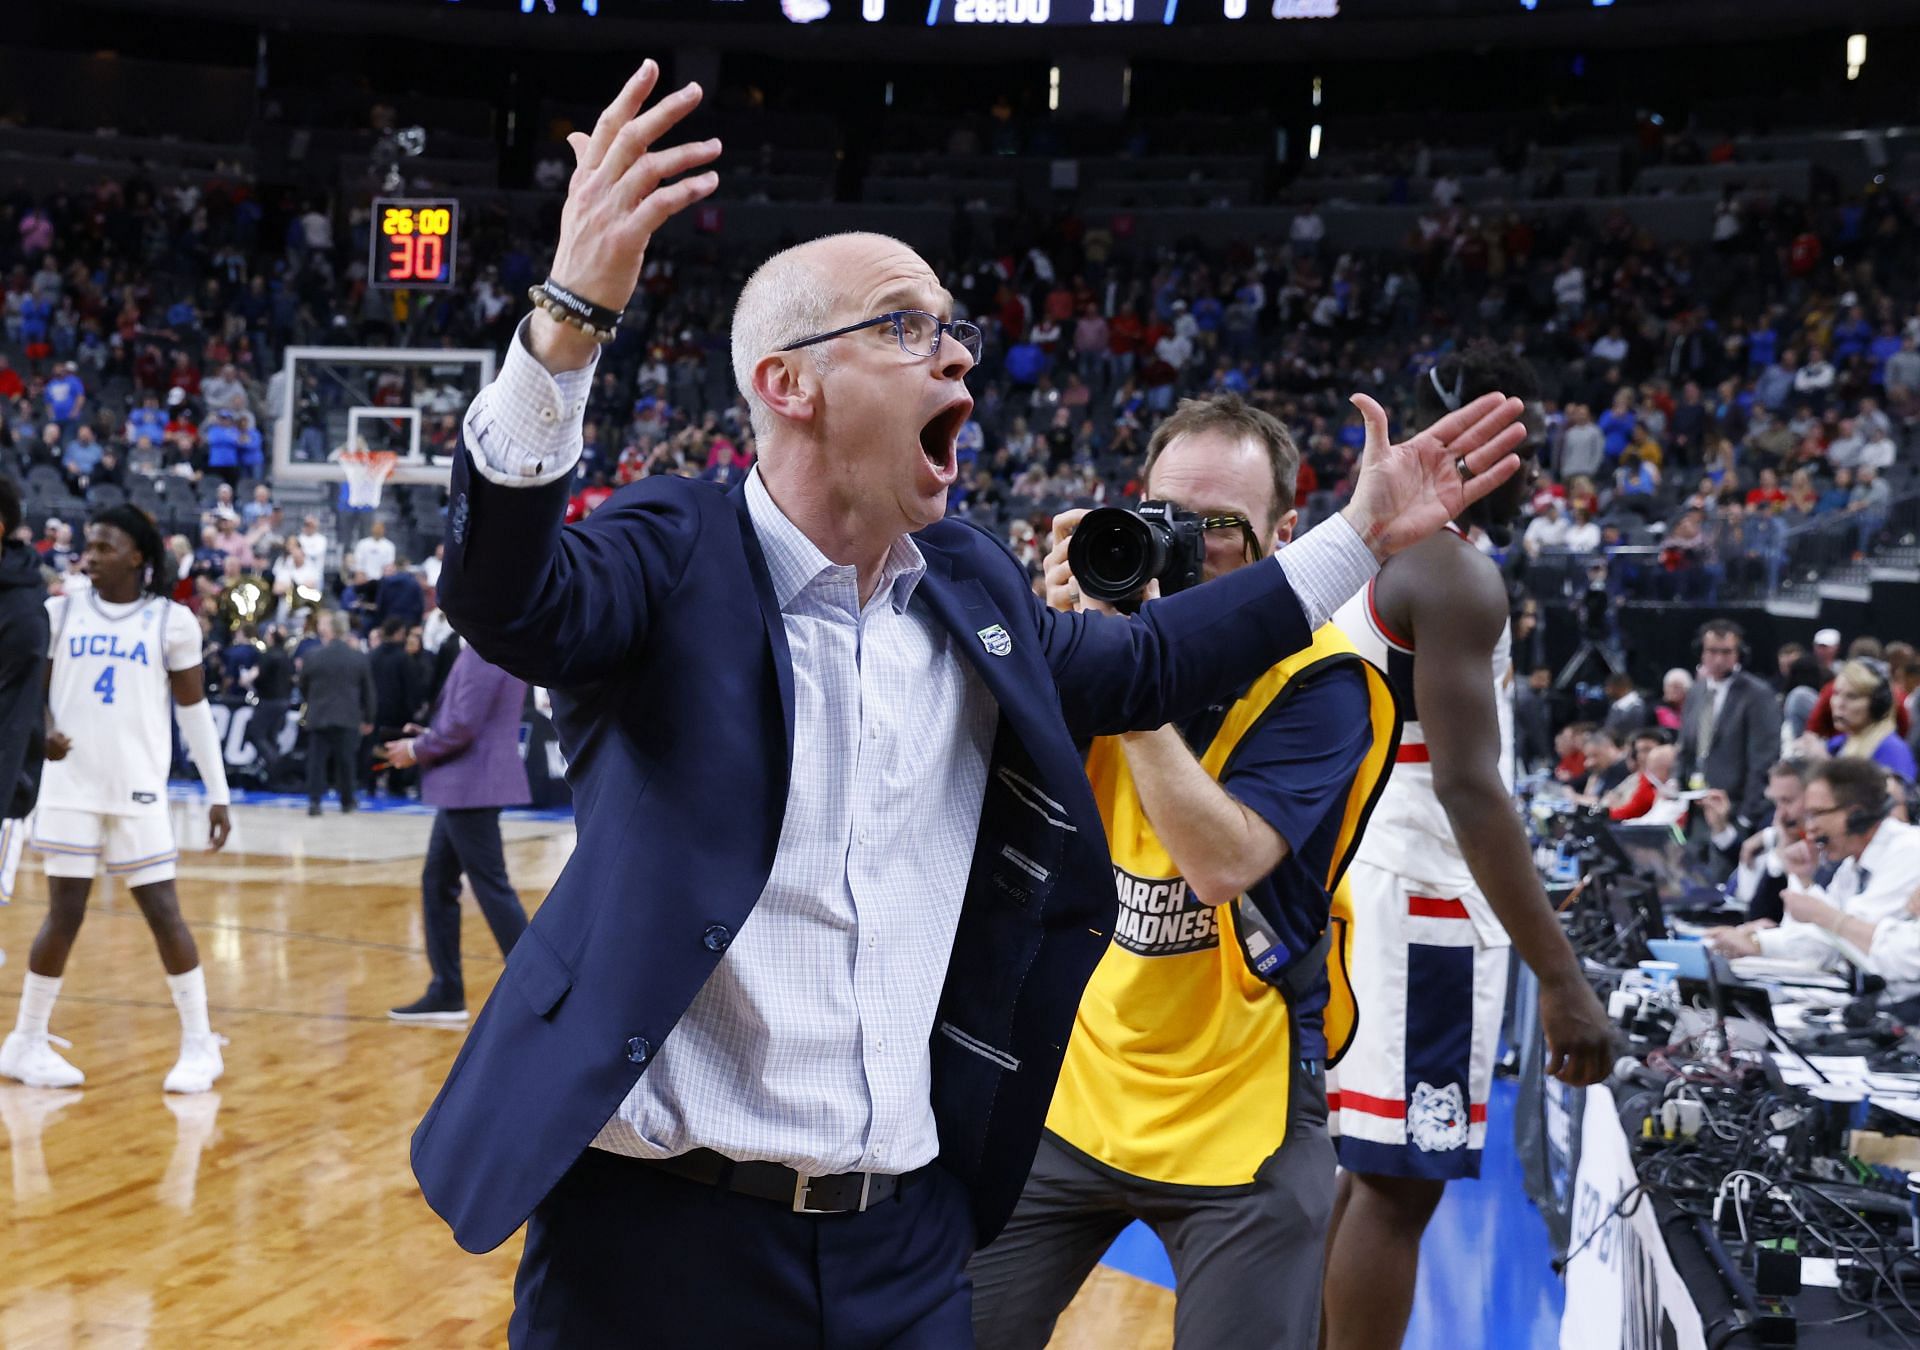 Bobby Hurley speaks out on brother Dan Hurley winning NCAA title with UConn  basketball